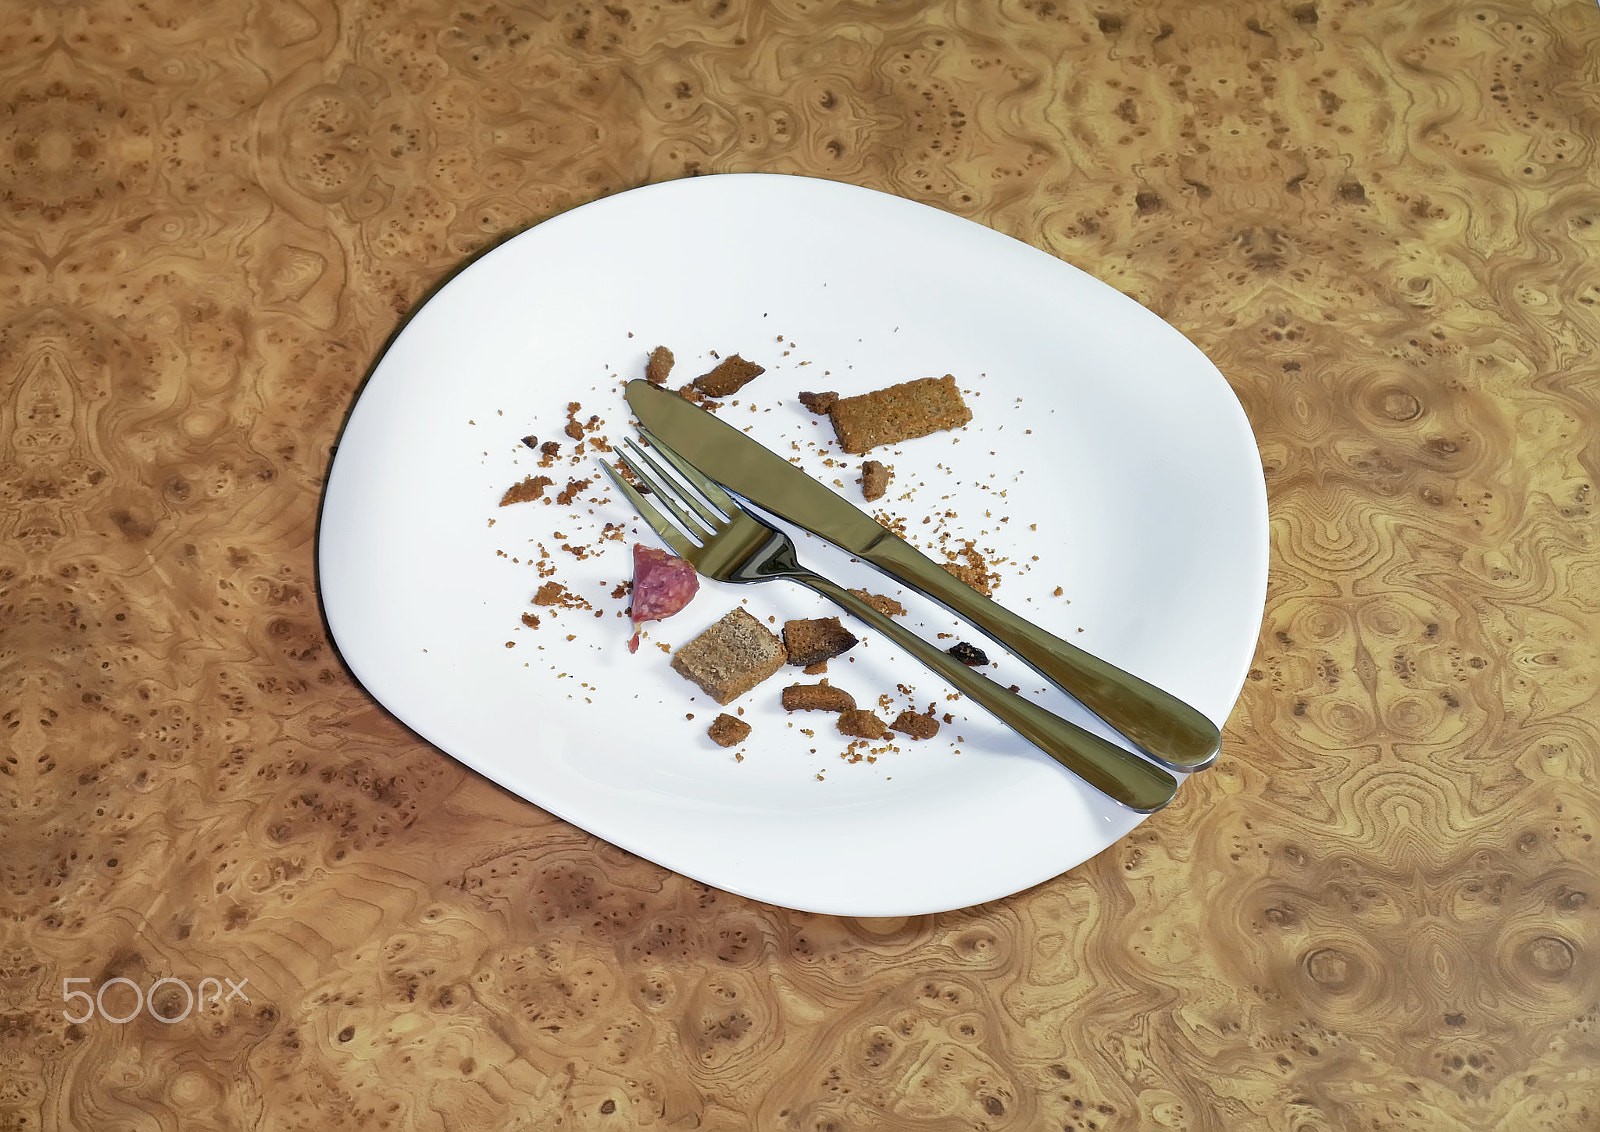 Panasonic Lumix DMC-GX85 (Lumix DMC-GX80 / Lumix DMC-GX7 Mark II) sample photo. Empty plate, fork and knife photography